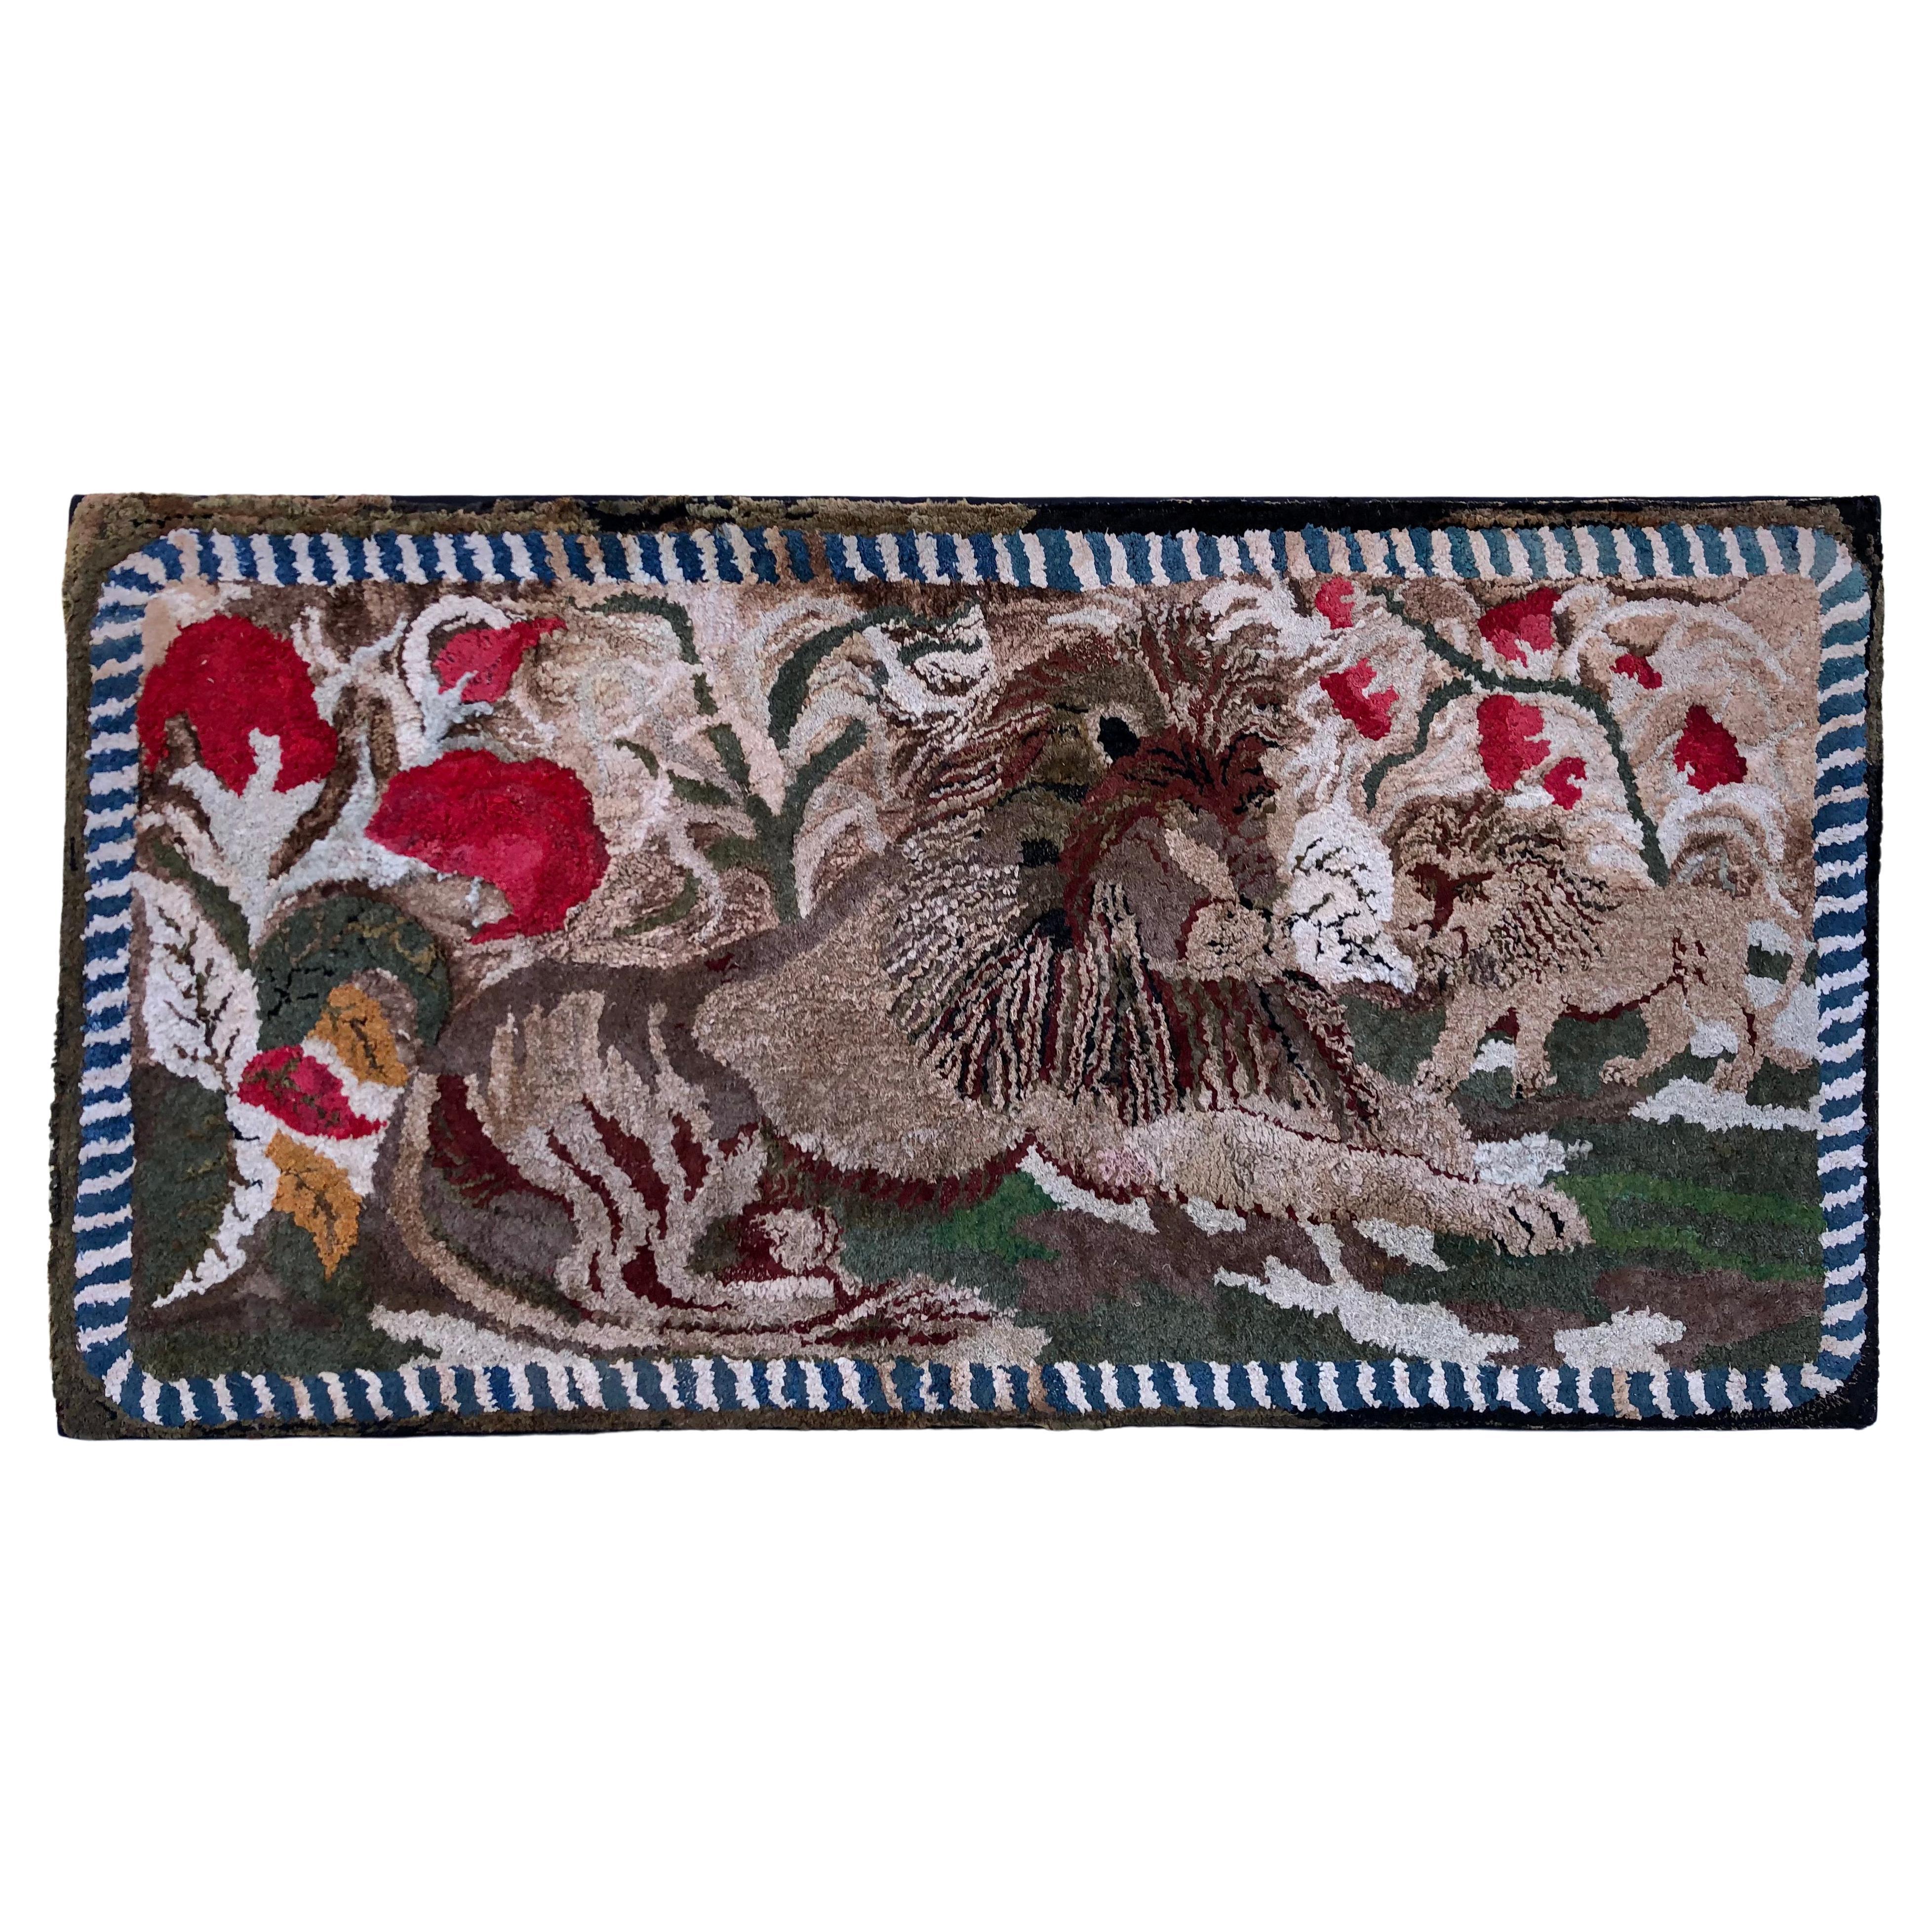 Late 19th Century American Hooked Rug with Lions